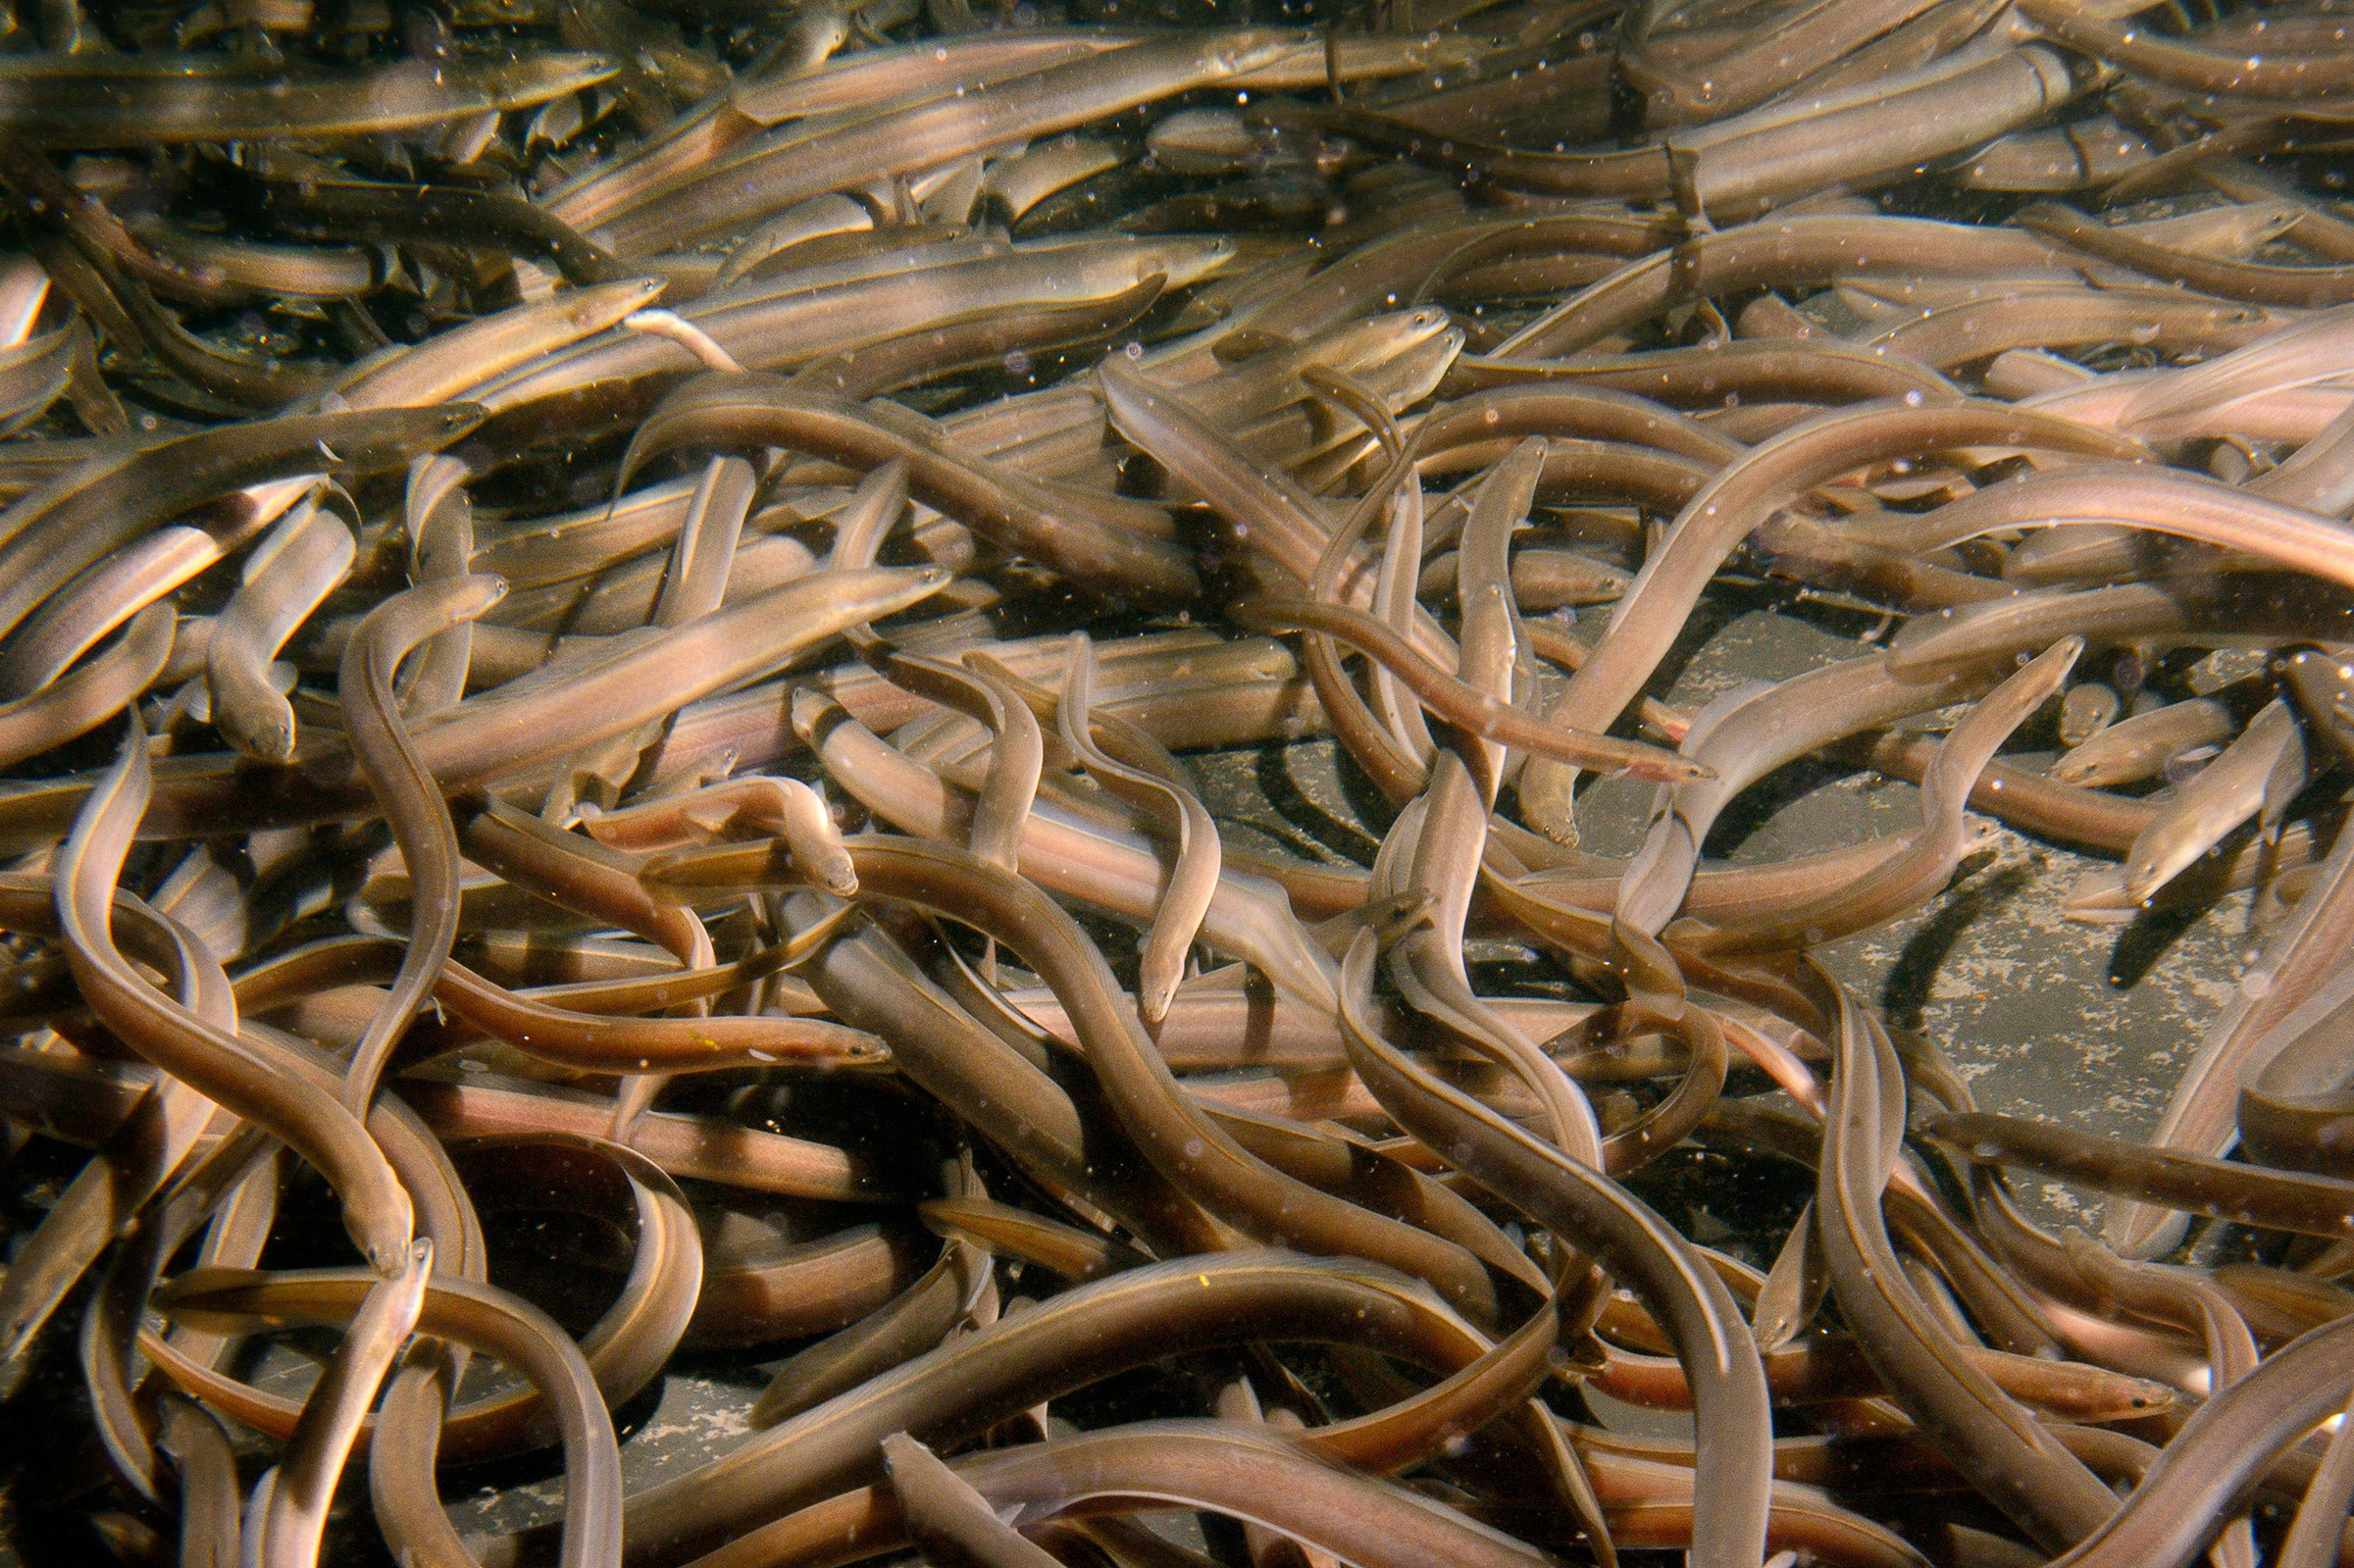 European eel elvers for a reintroduction swimming in a large holding tank in Gloucester, UK